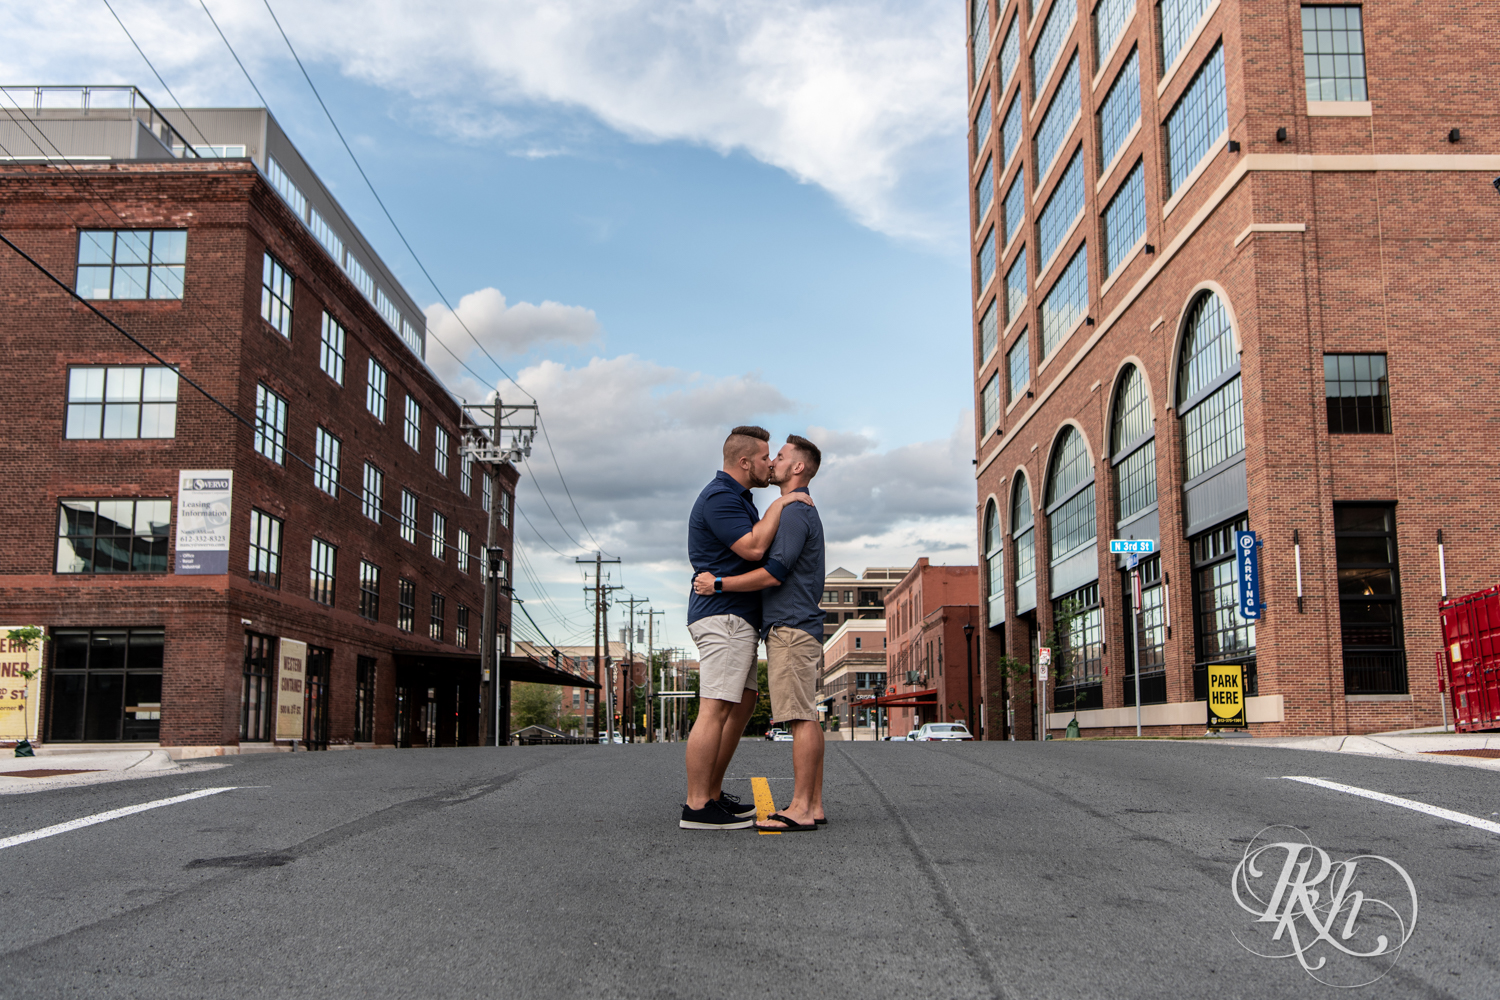 Two men kiss in the middle of the road in Minneapolis, Minnesota.